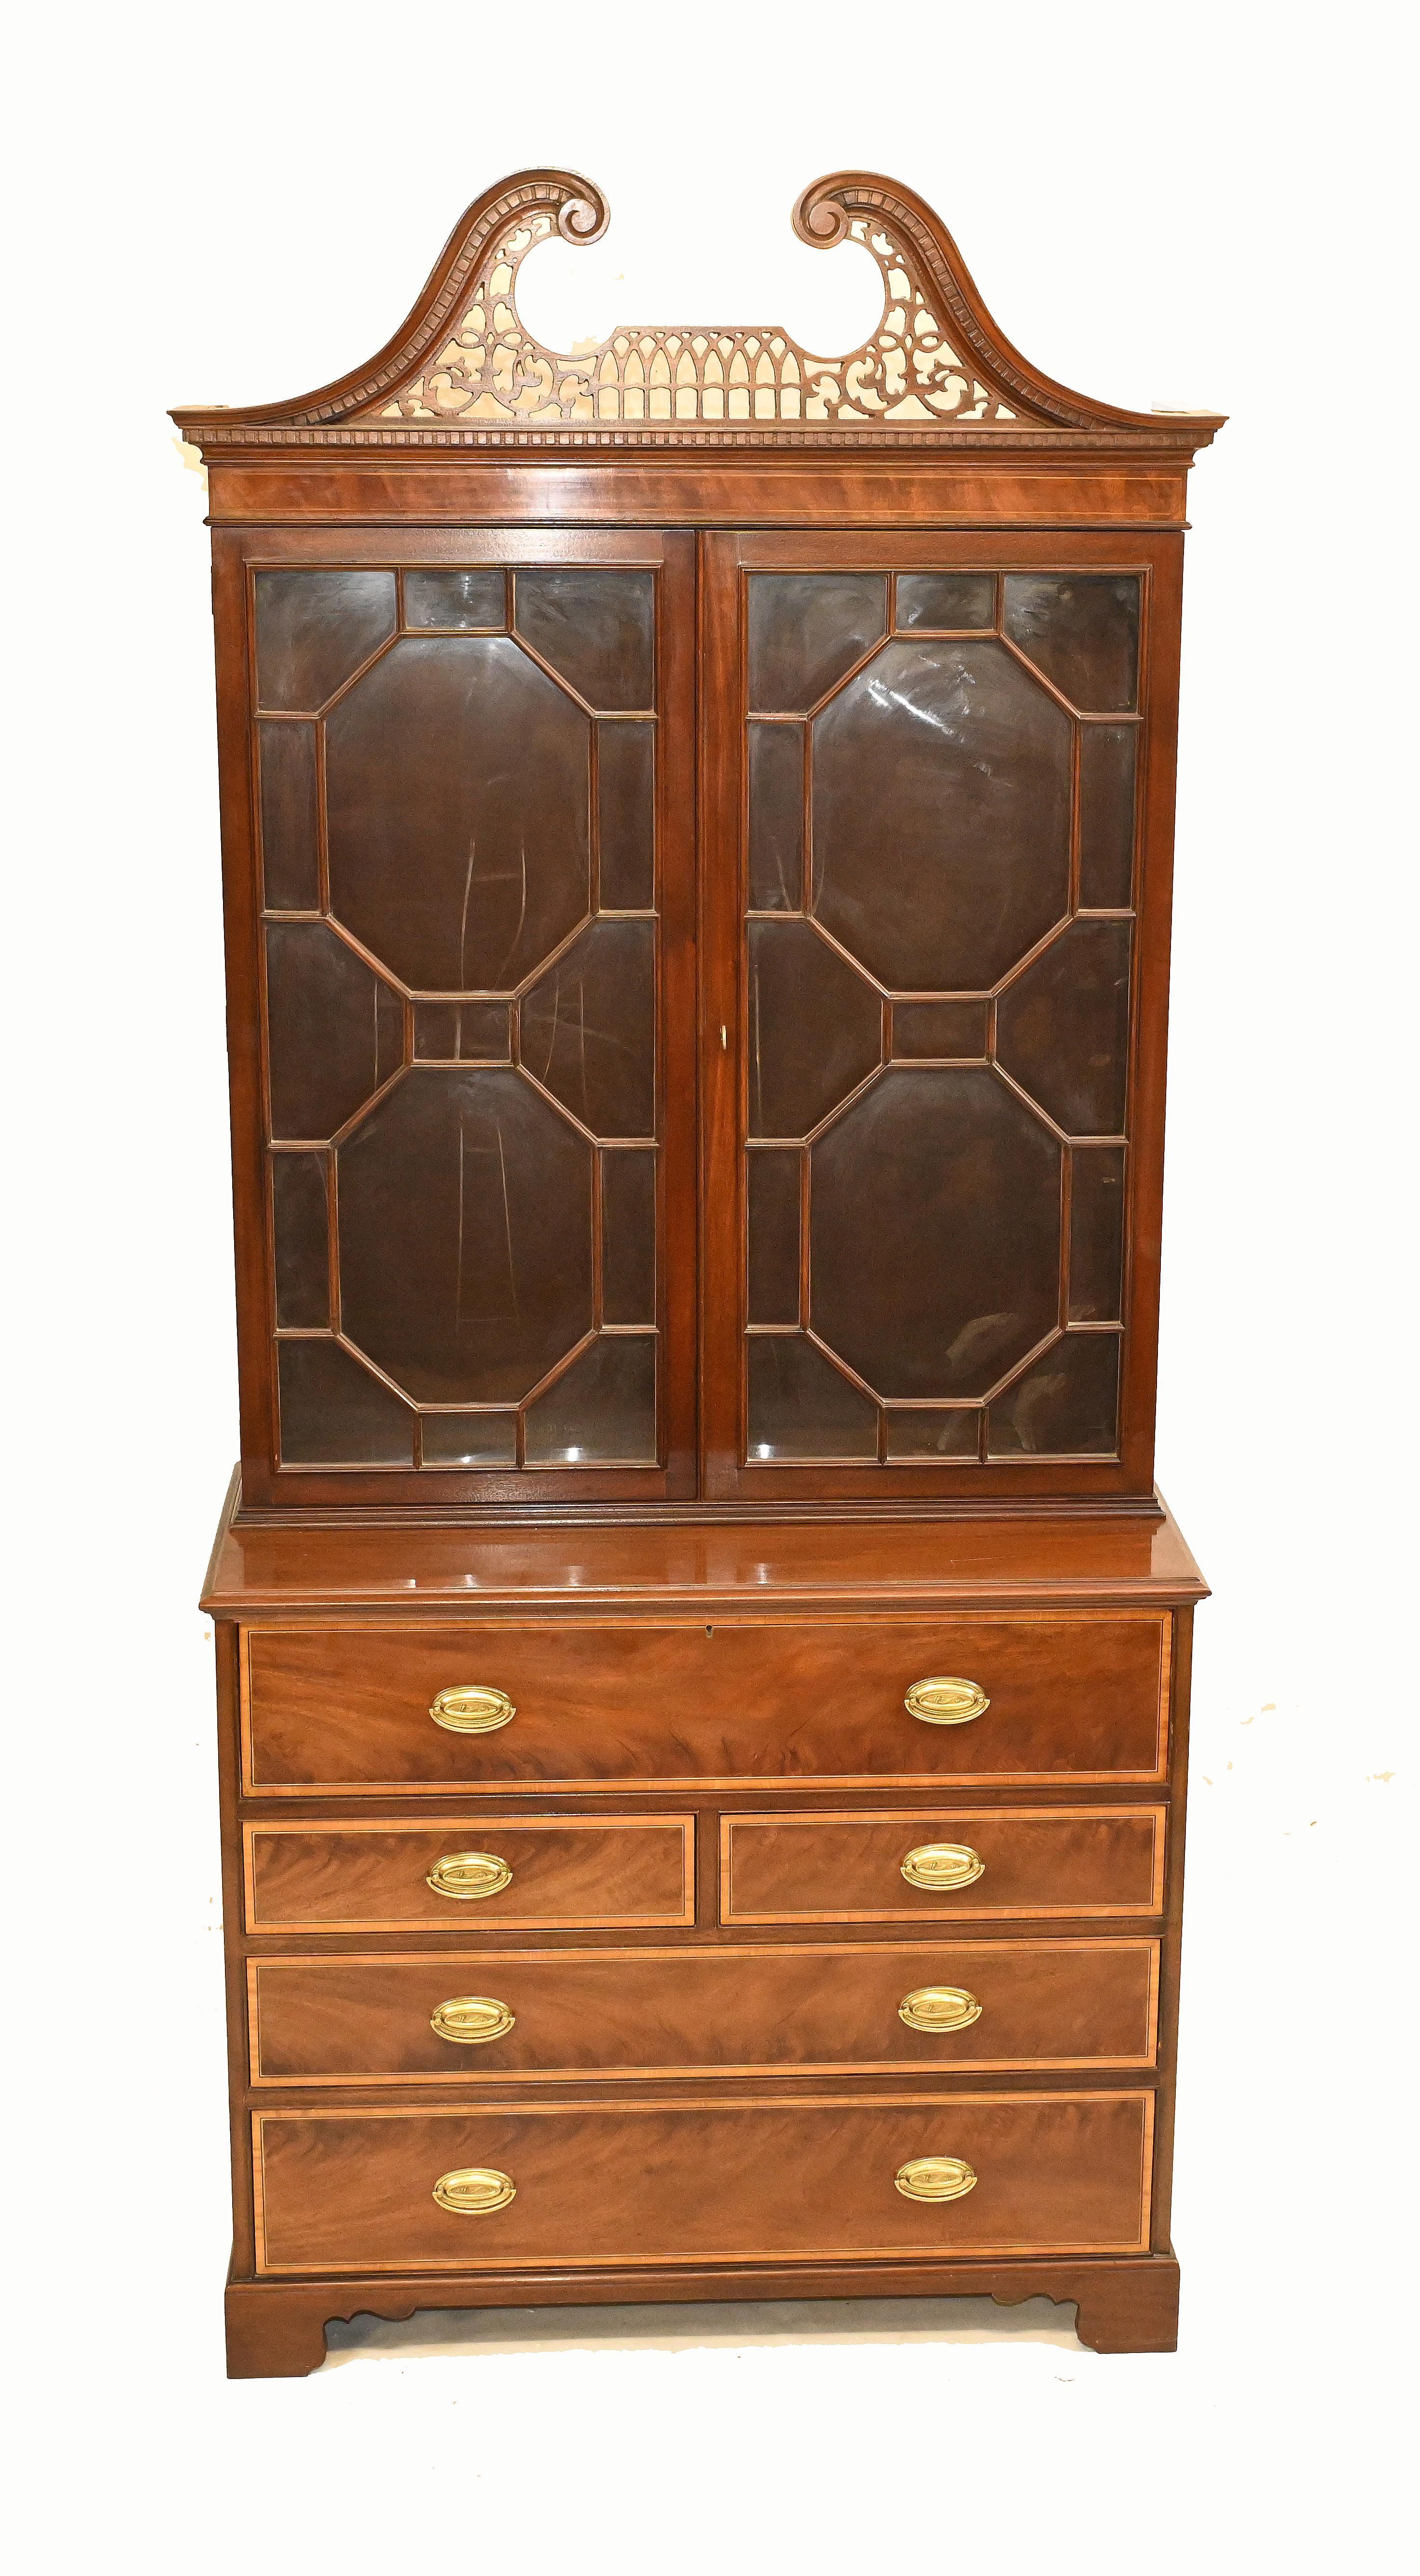 Gorgeous Sheraton style secretaire bookcase in mahogany
Flame mahogany with satinwood crossbanding
Desk section opens out below glass fronted top to reveal writing surface
Also cubby holes and drawers
Also bearing a Michael Davies shipping label